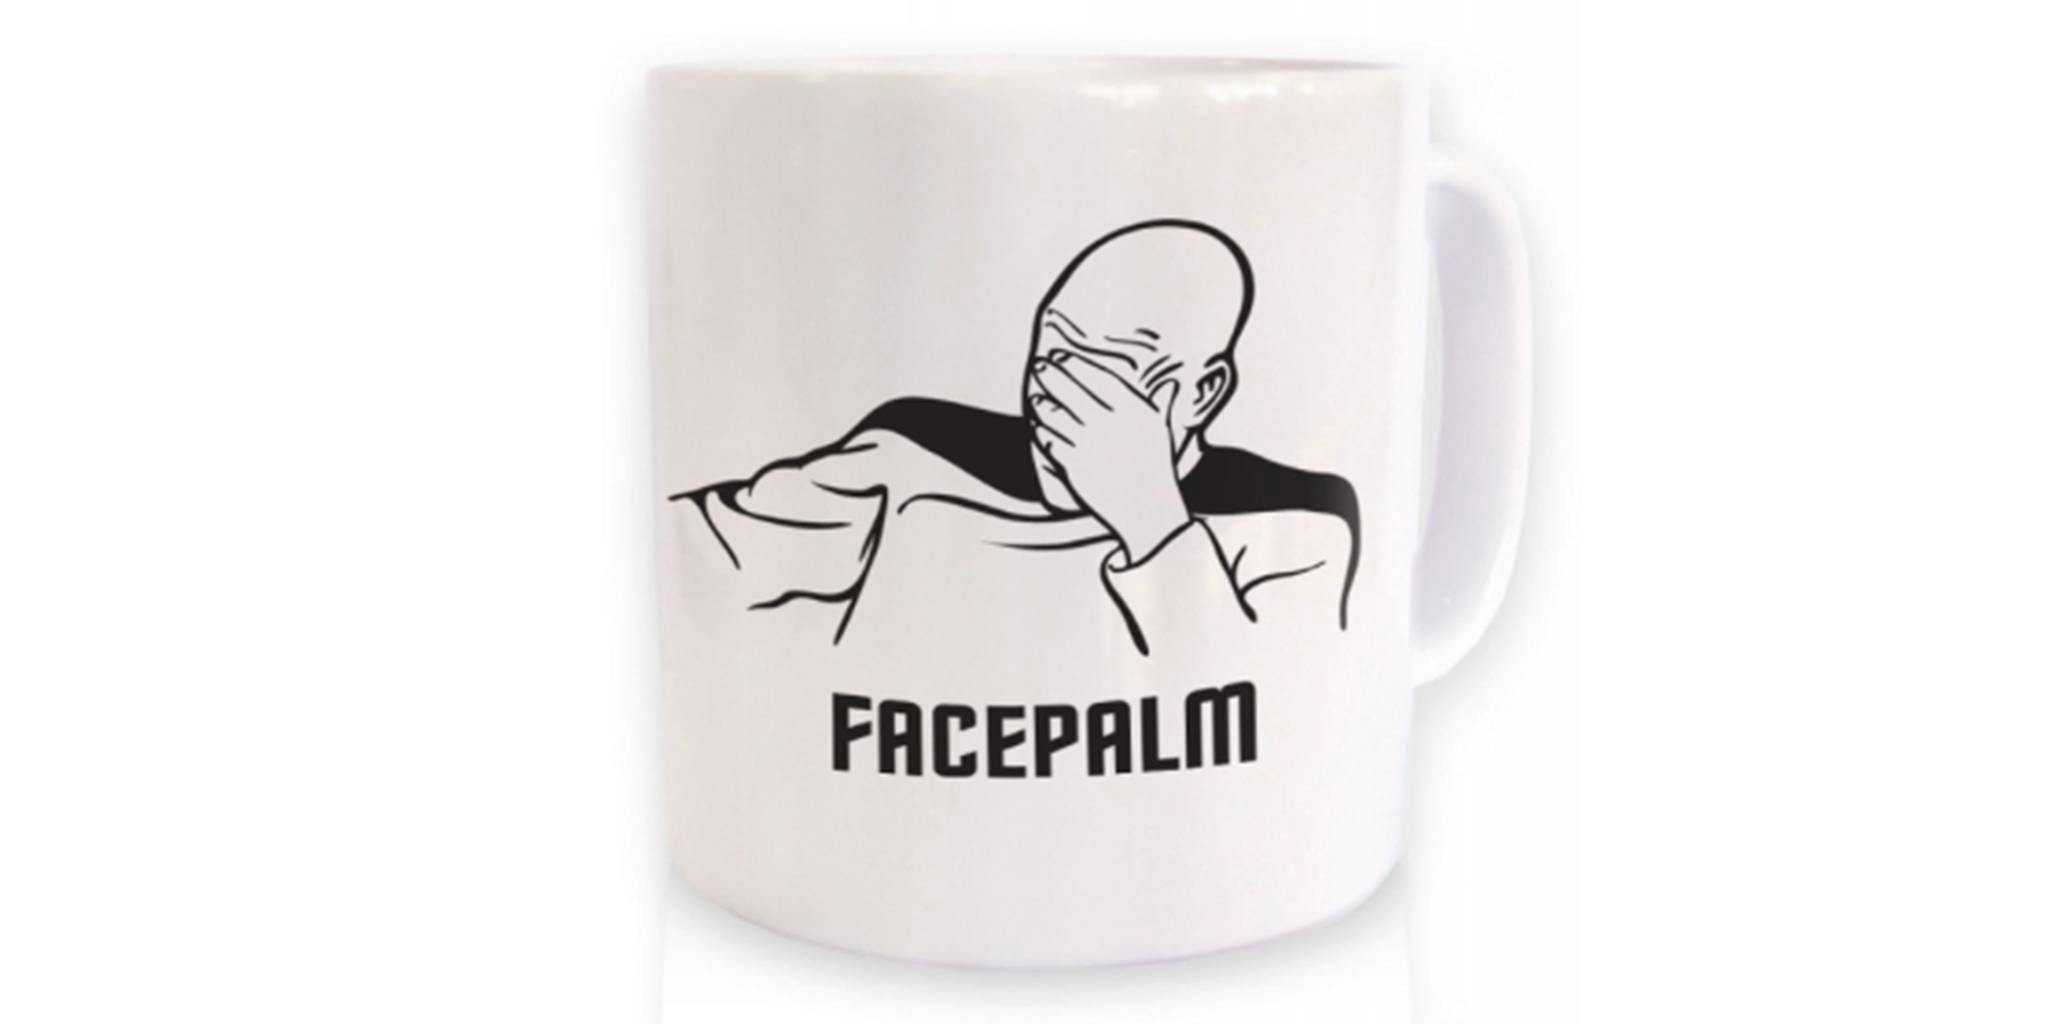 This Captain Picard mug is perfect for when you want to scream at work